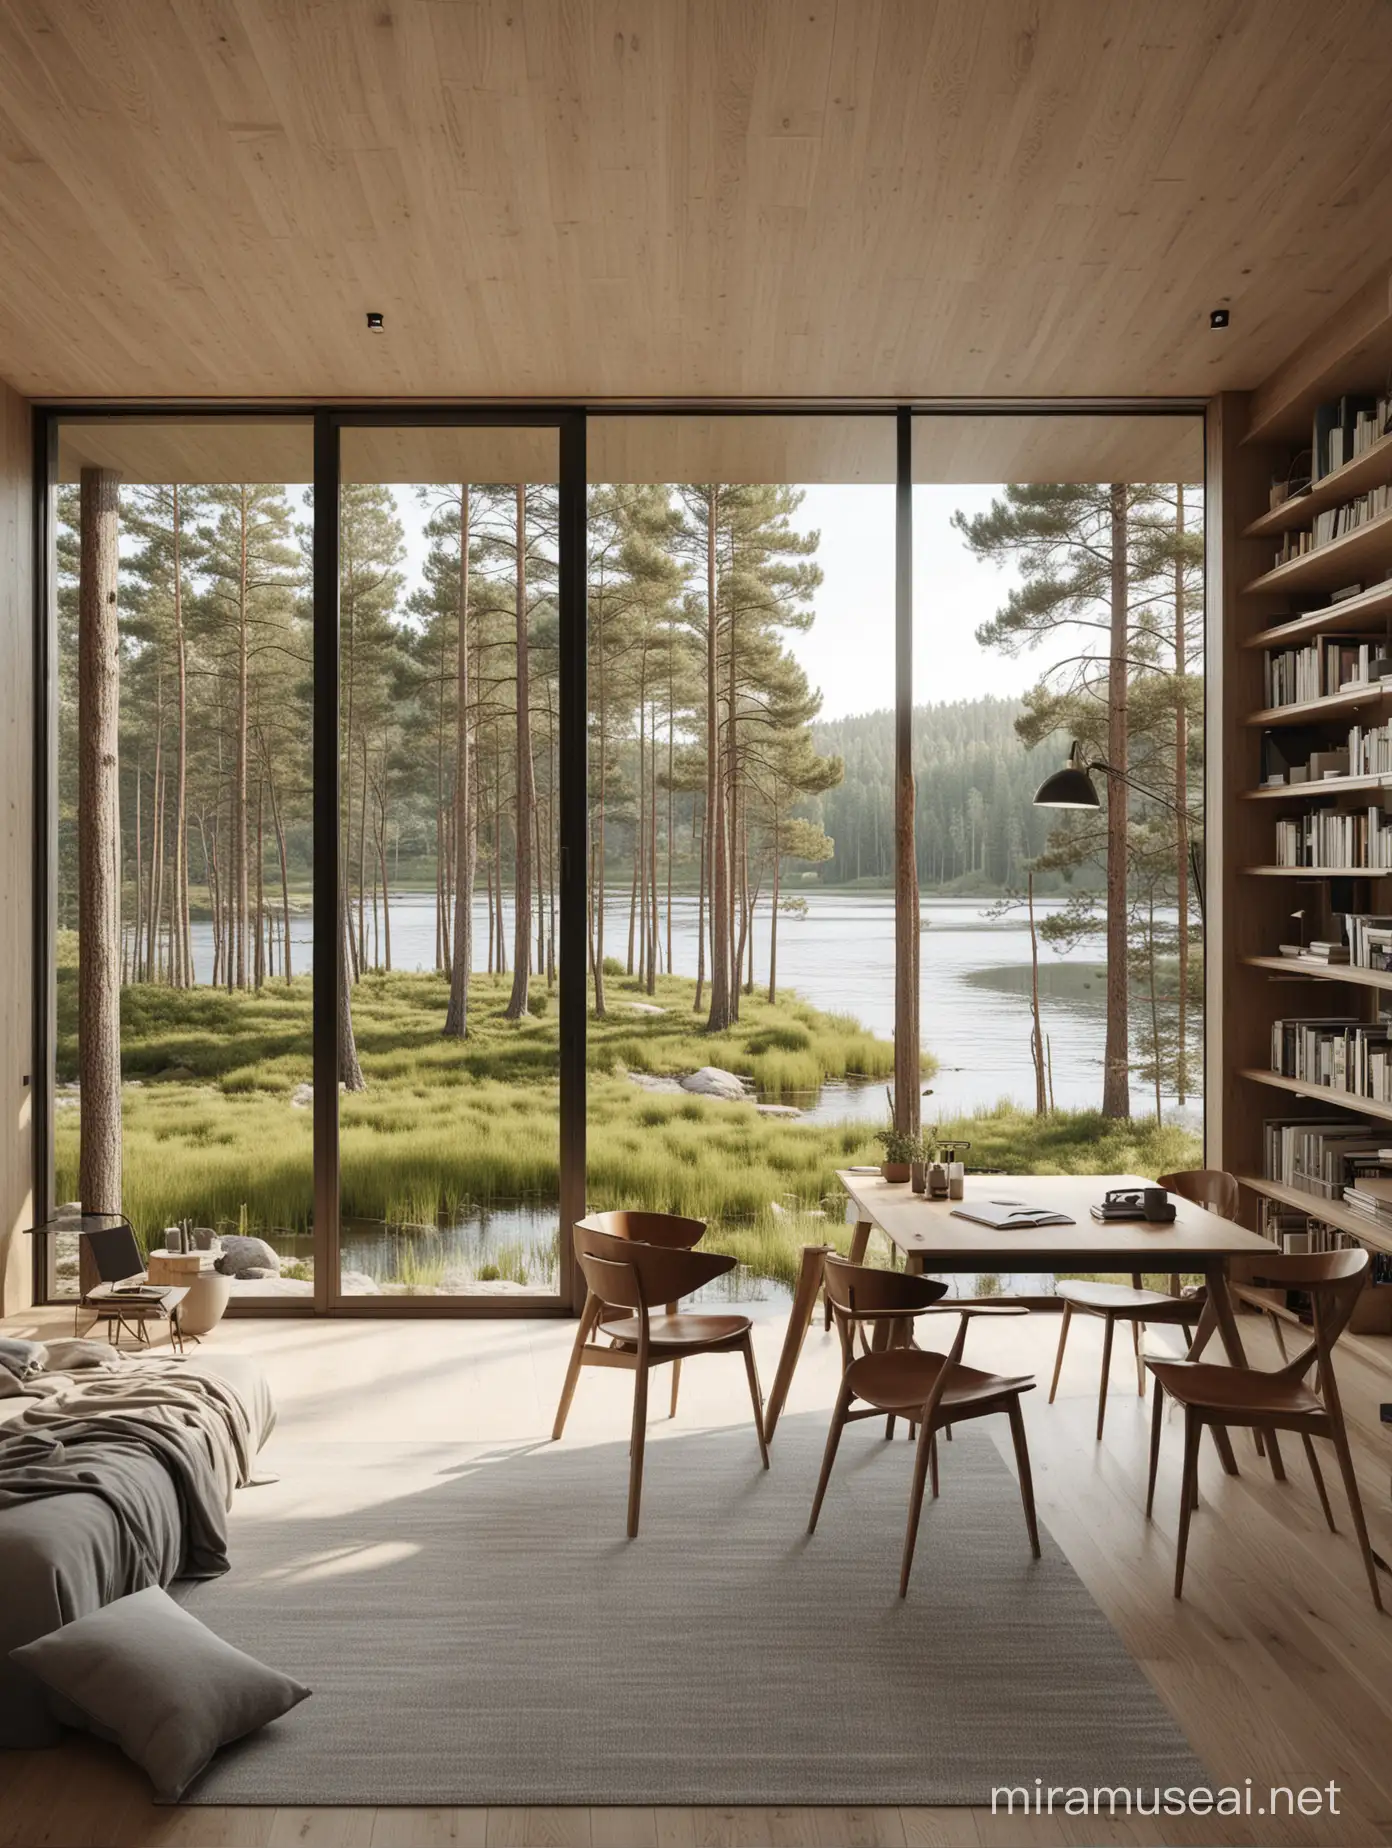 Modern Minimalist Workspace Overlooking River and Pine Trees